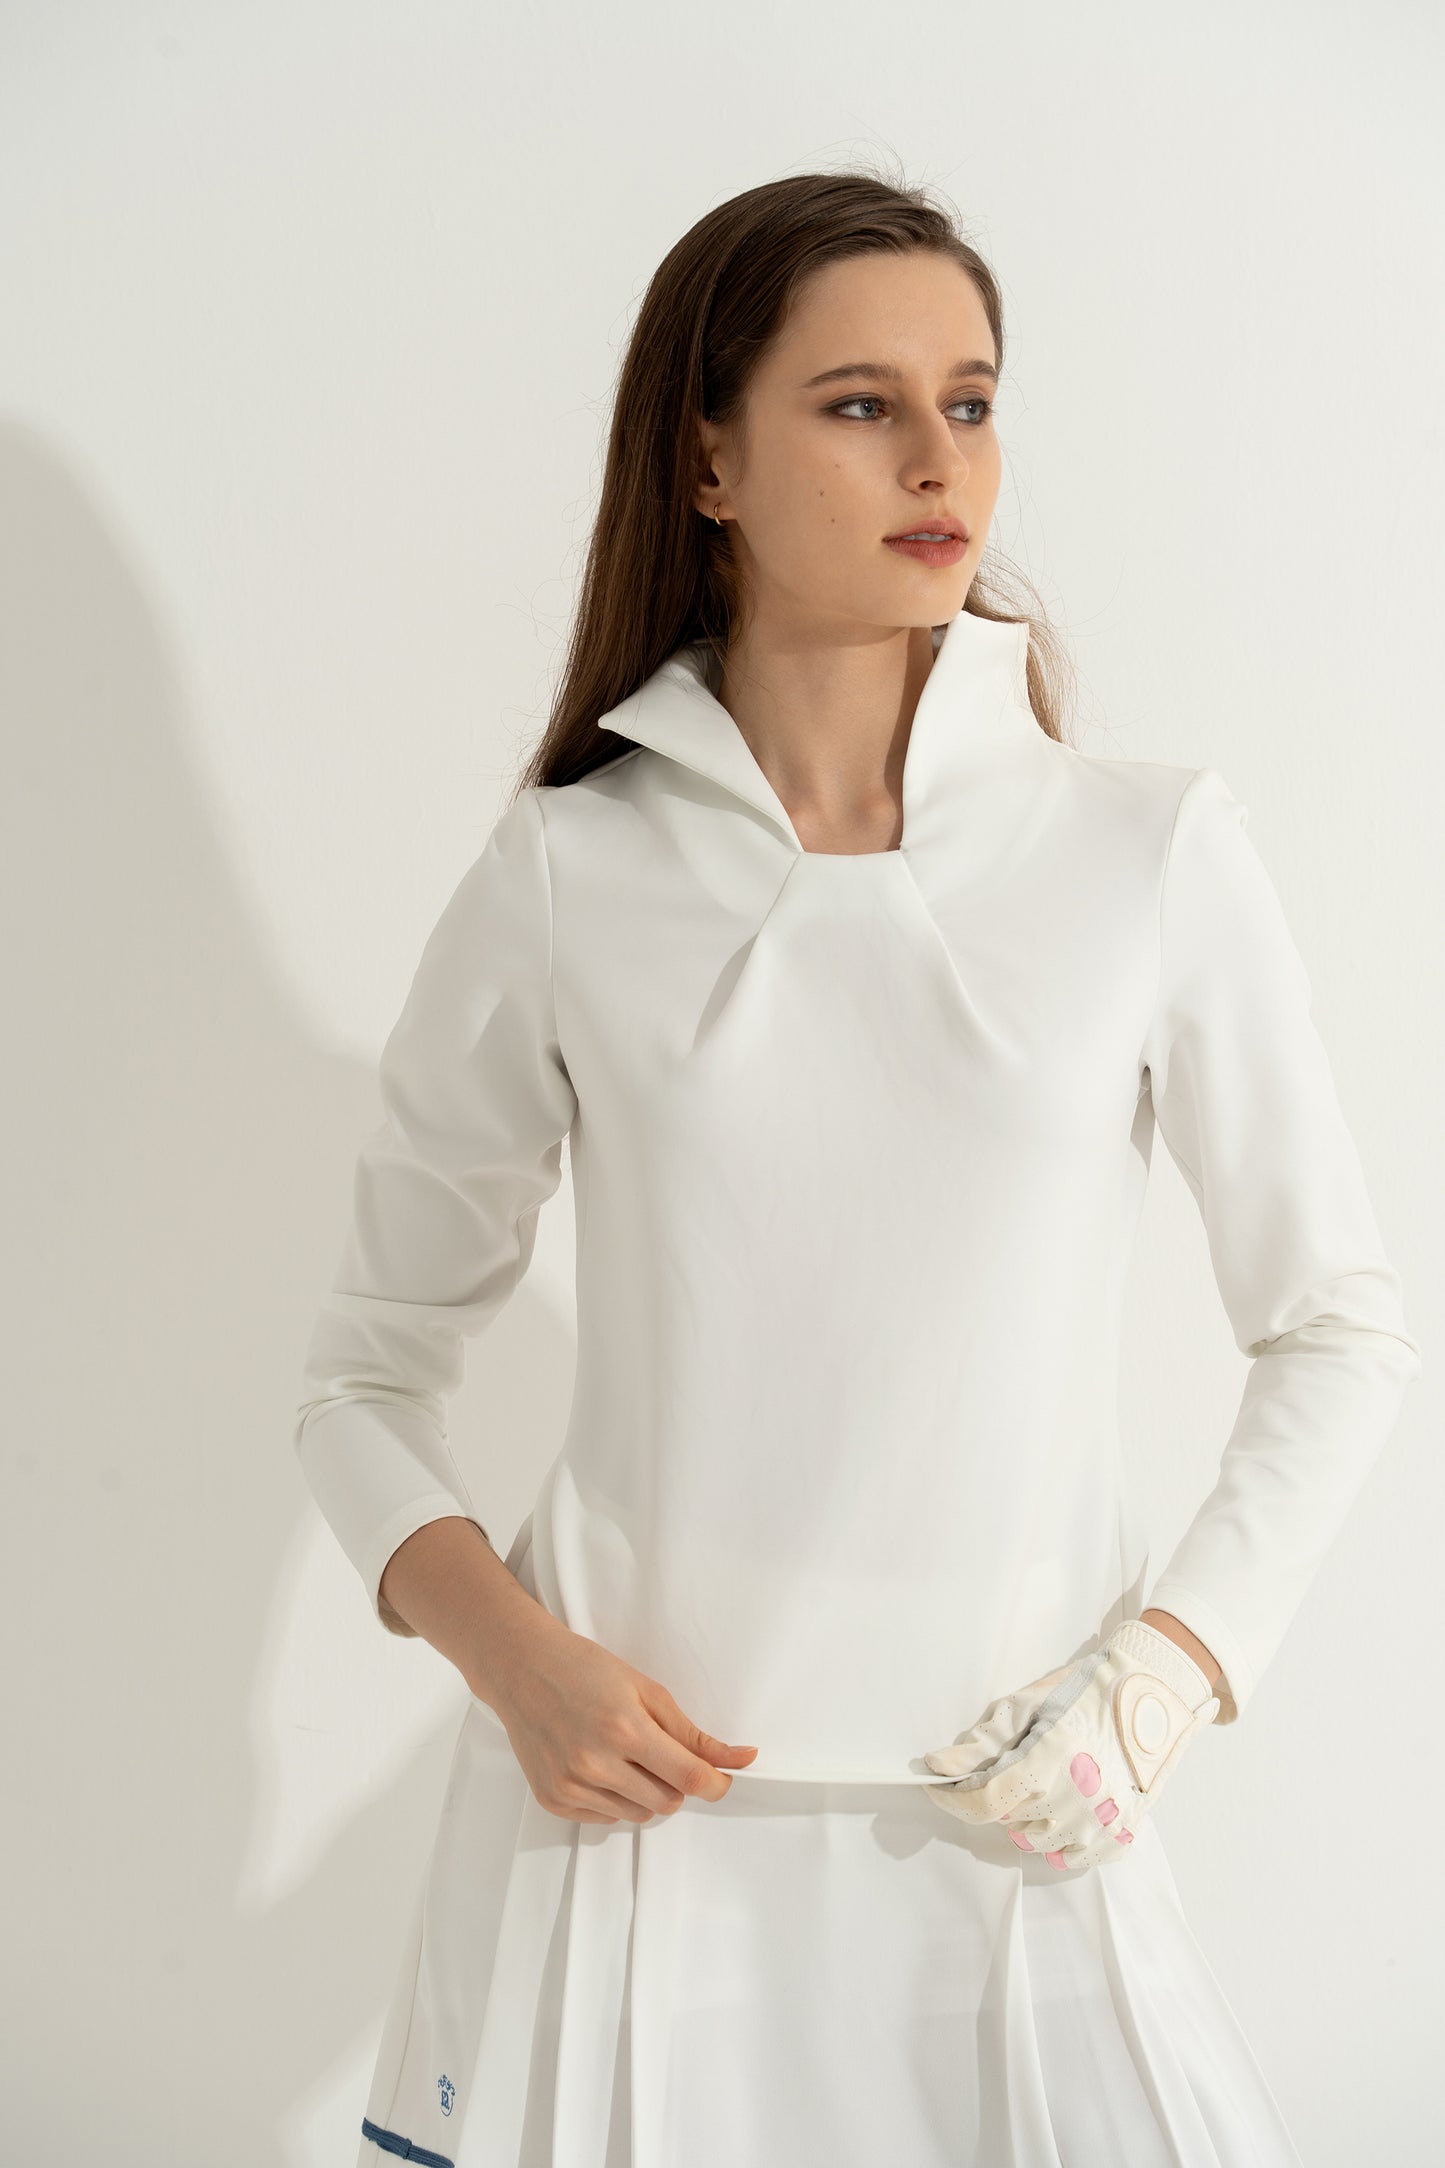 Equestrian Classic Long Sleeve |Lucent White